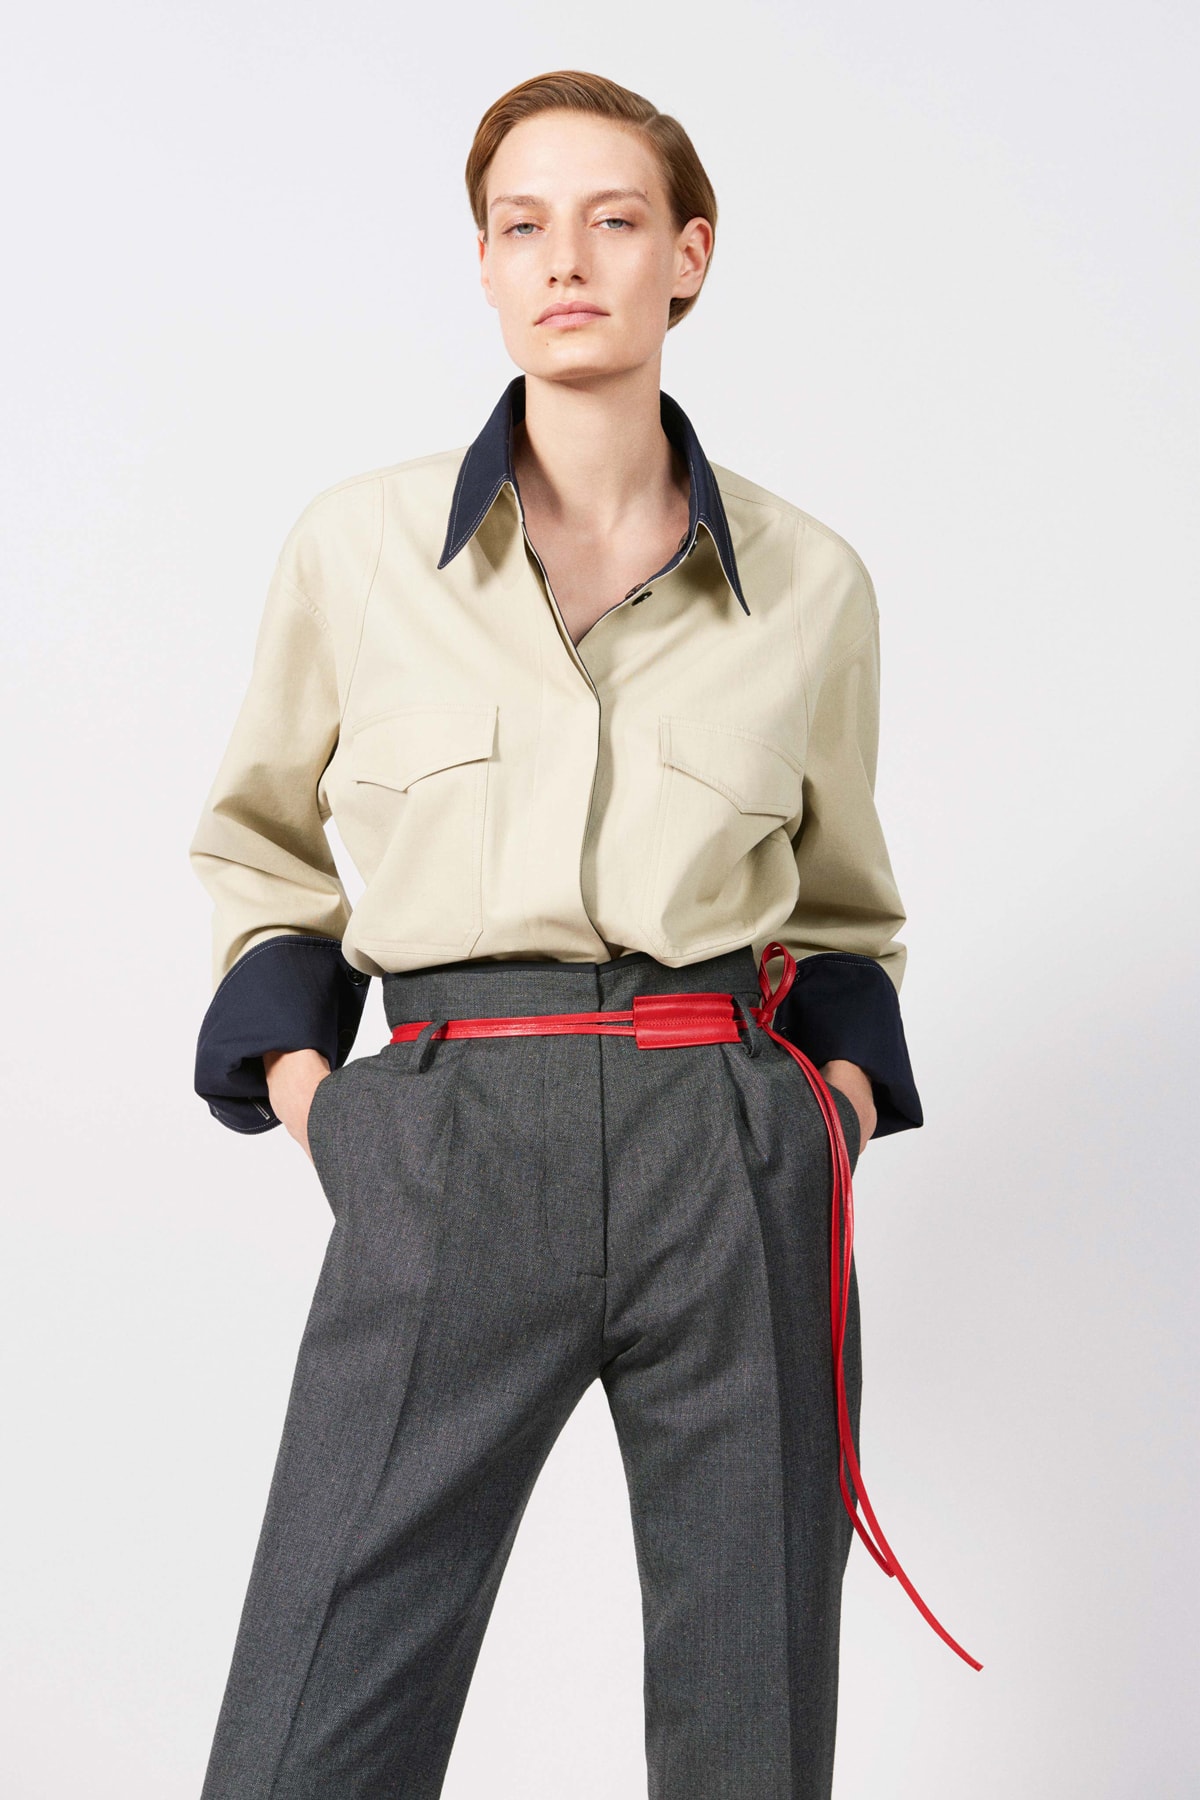 Victoria Beckham Resort 2019 Collection Lookbook Collared Shirt Tan Trousers Grey Leather Belt Red